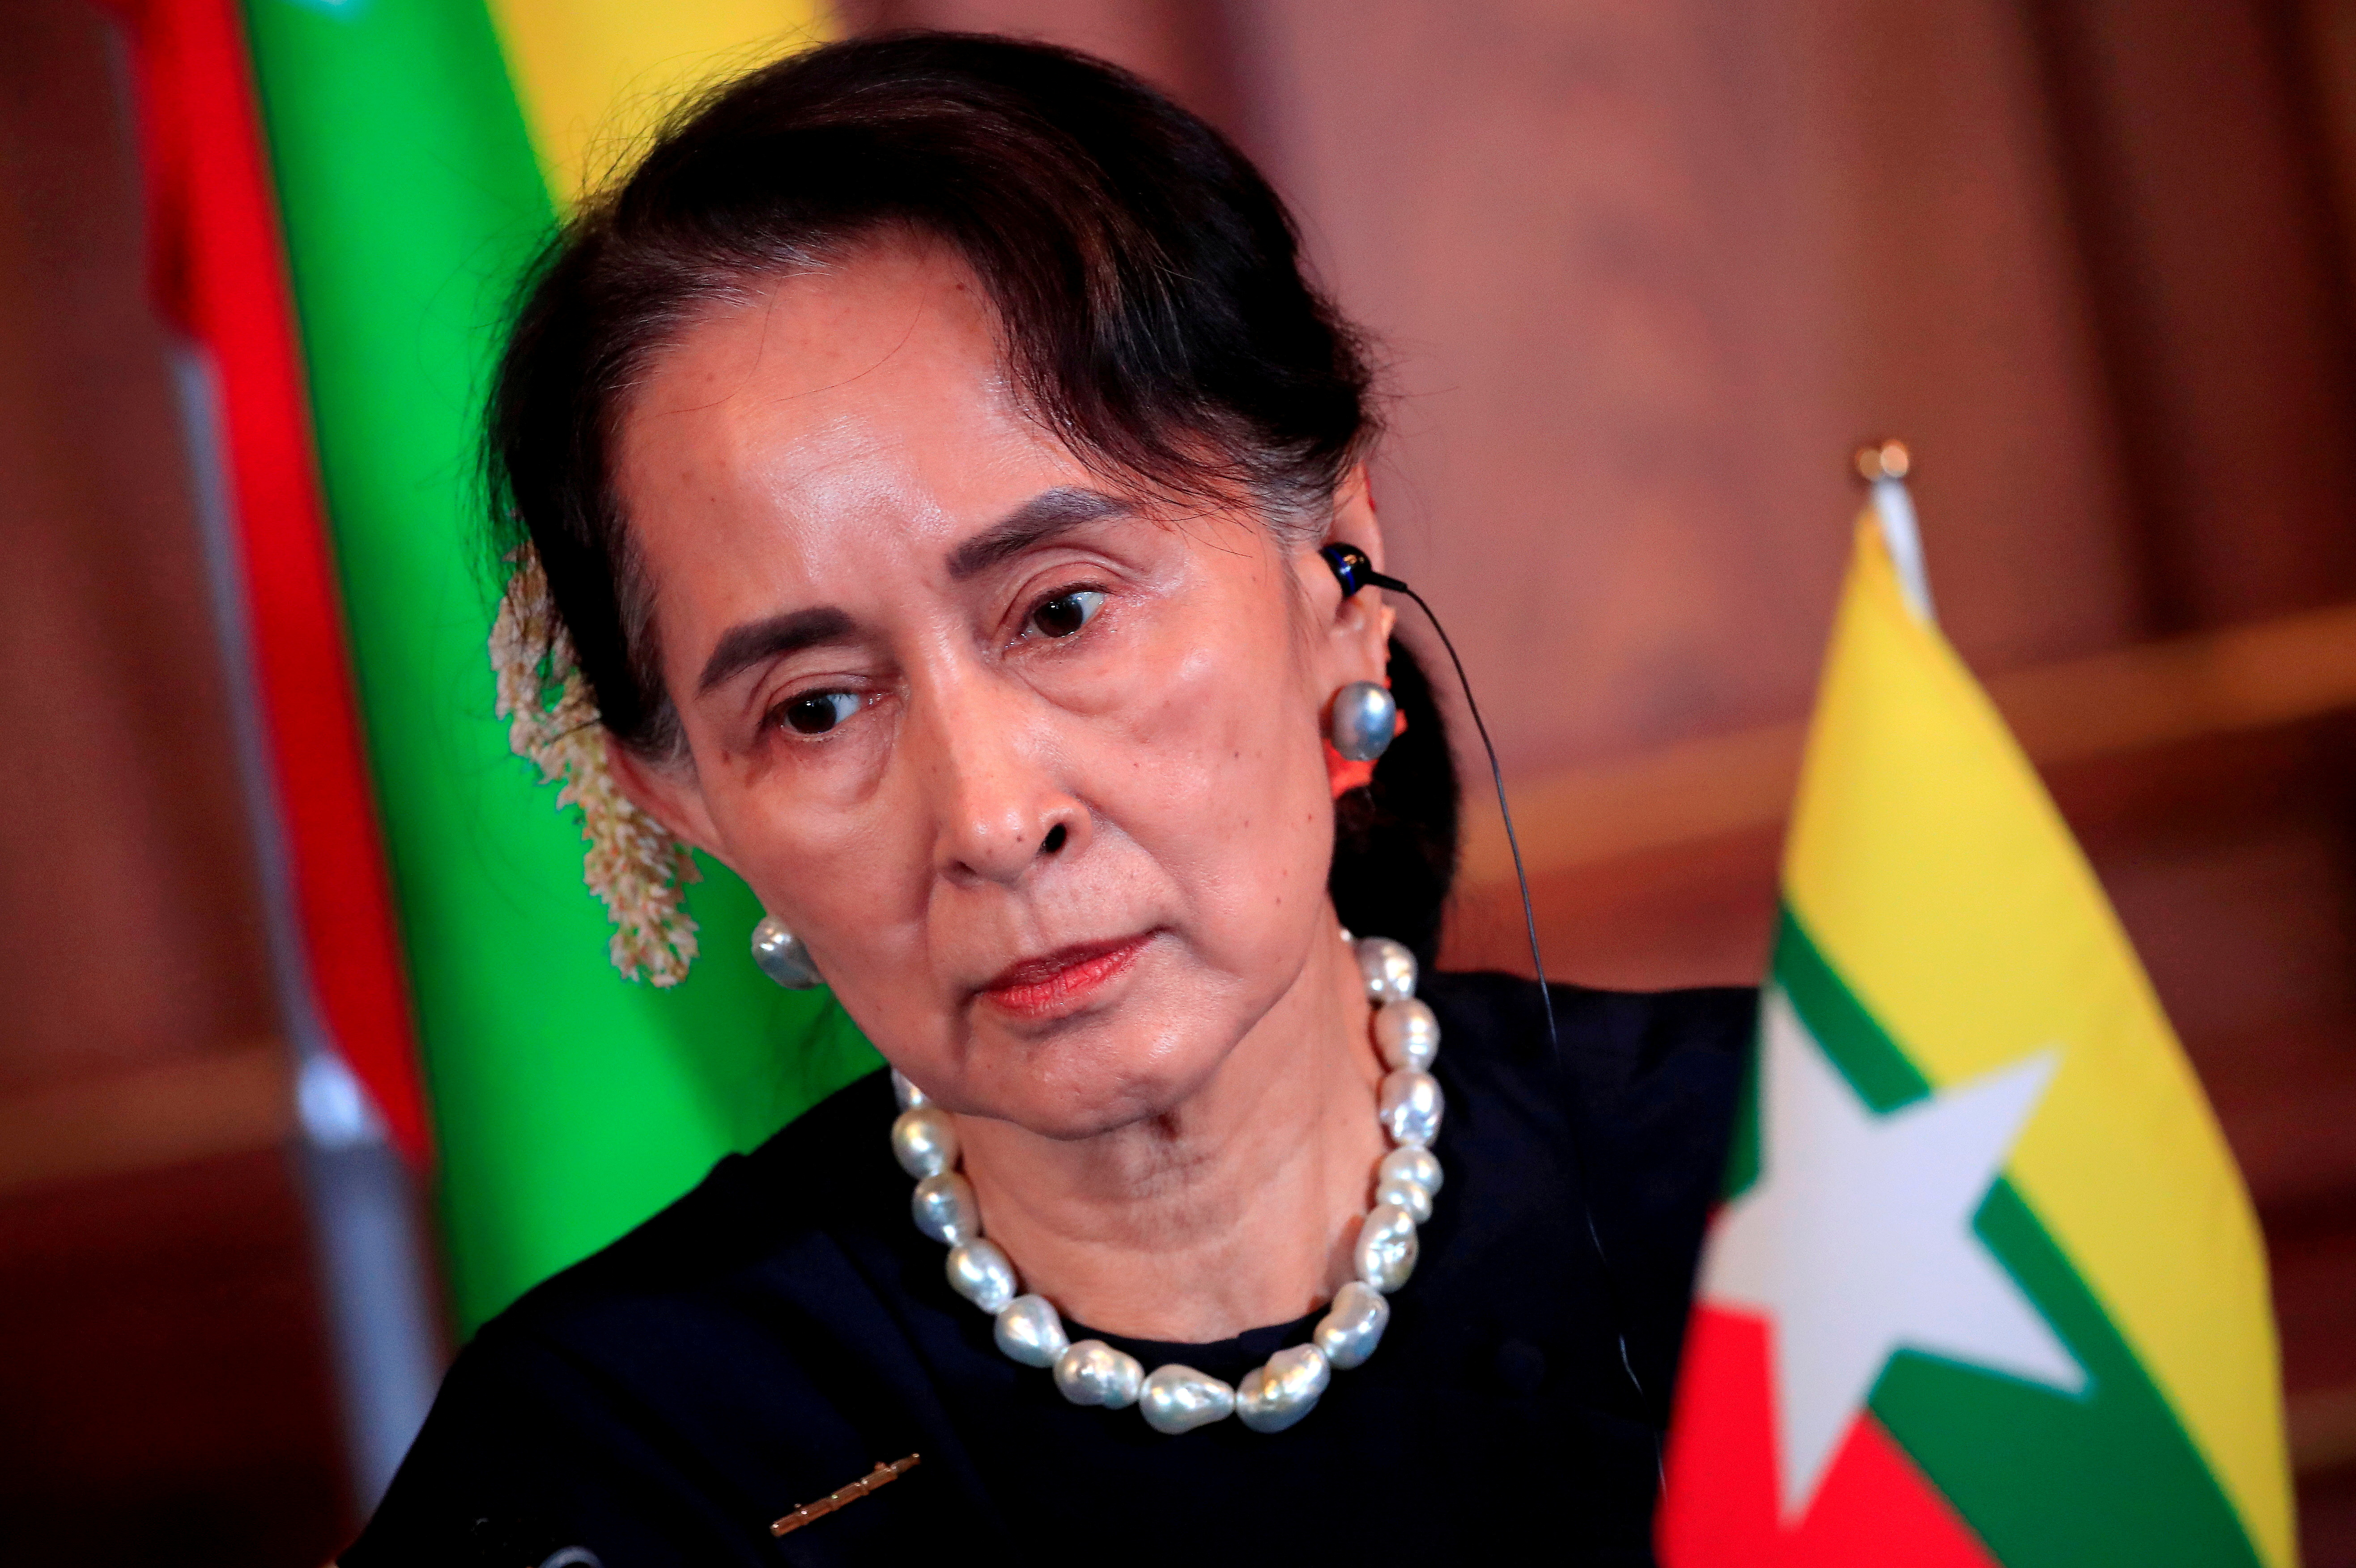 Myanmar's Aung San Suu Kyi attends the joint news conference of the Japan-Mekong Summit Meeting in Tokyo